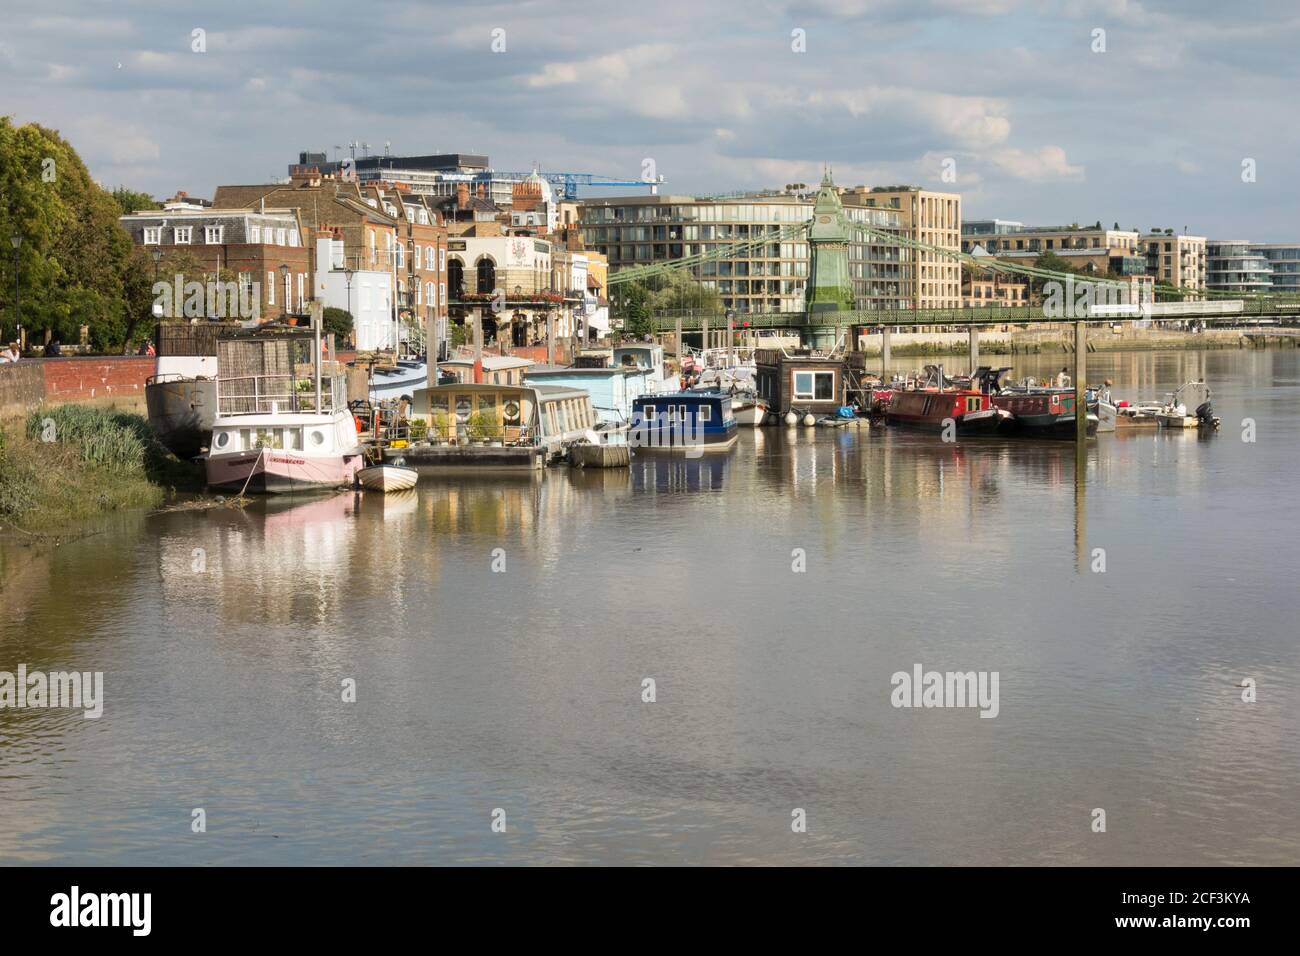 Houseboats moored on the River Thames by Furnival Gardens, Hammersmith, London, UK Stock Photo